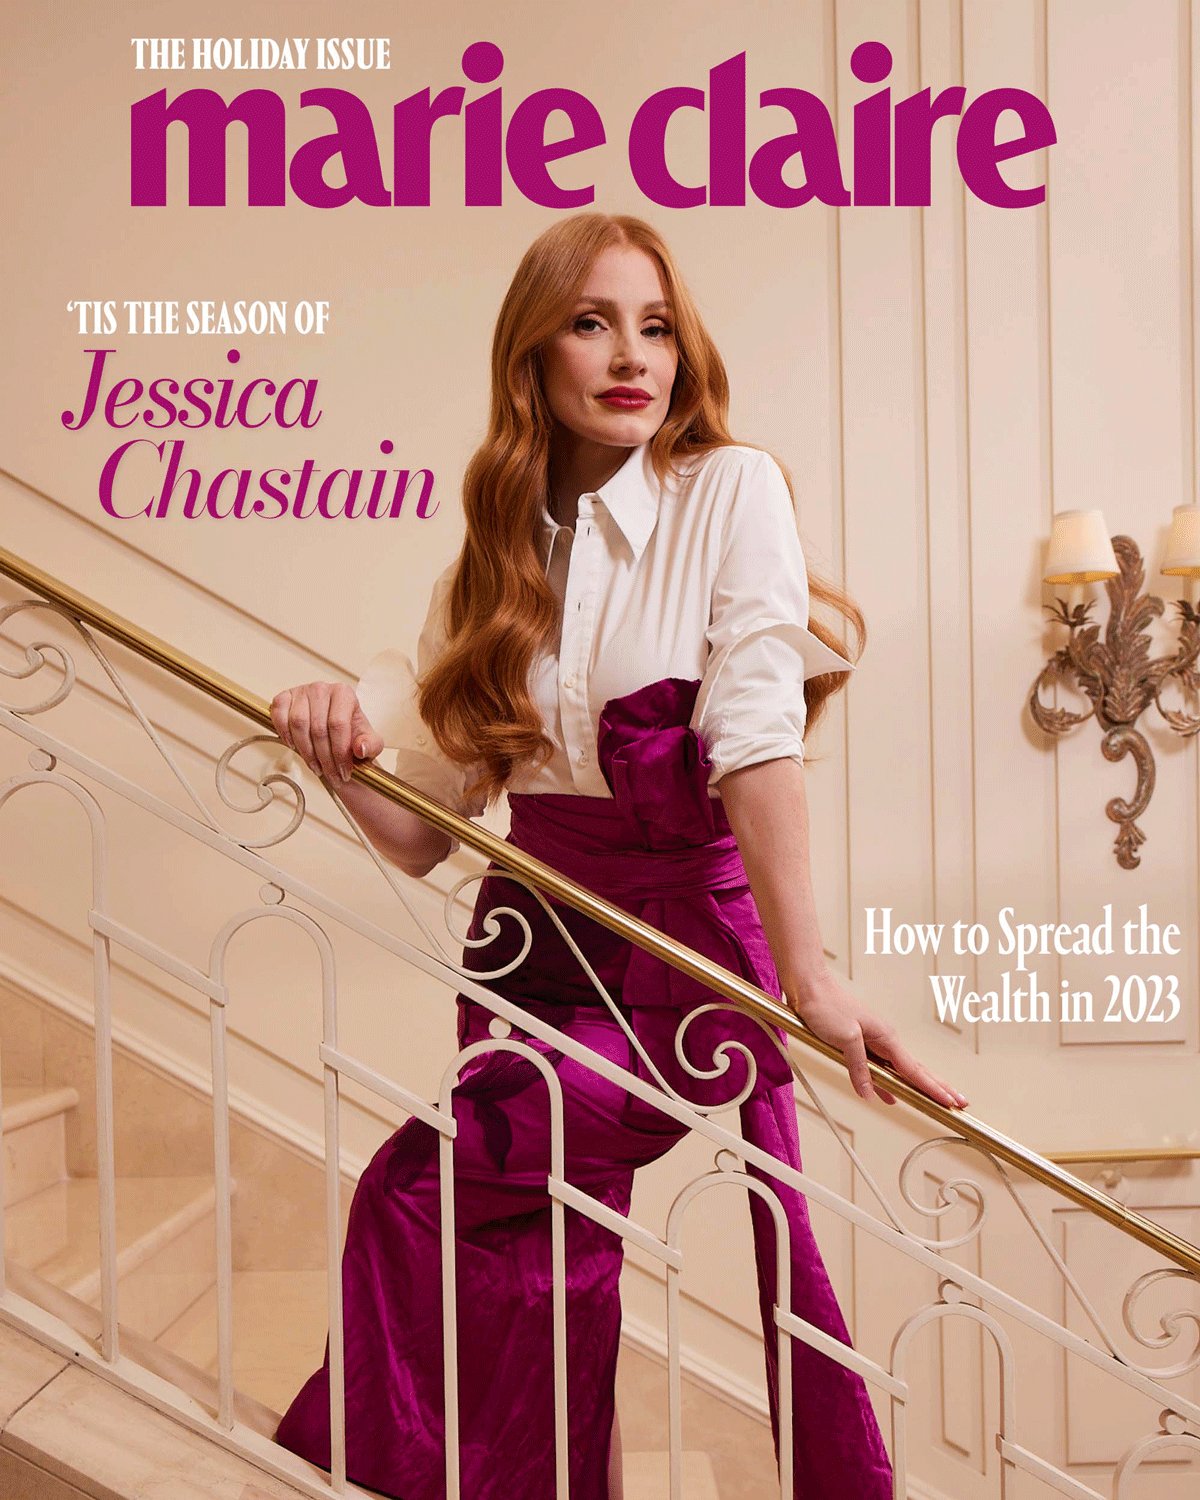 Jessica Chastain in 'The Good Fight' Lensed by Jessica Chou for